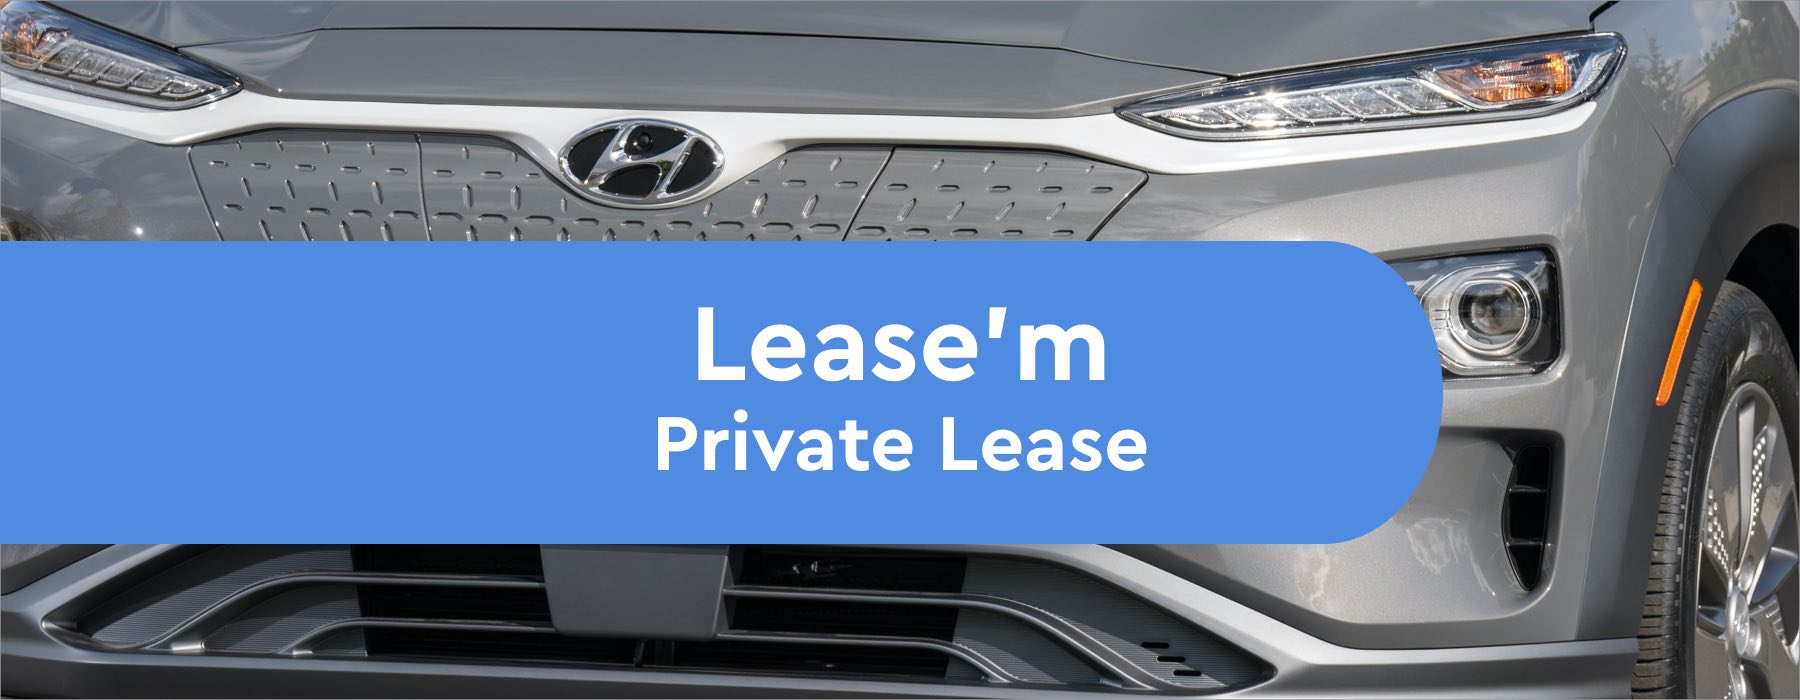 leasem Private Lease